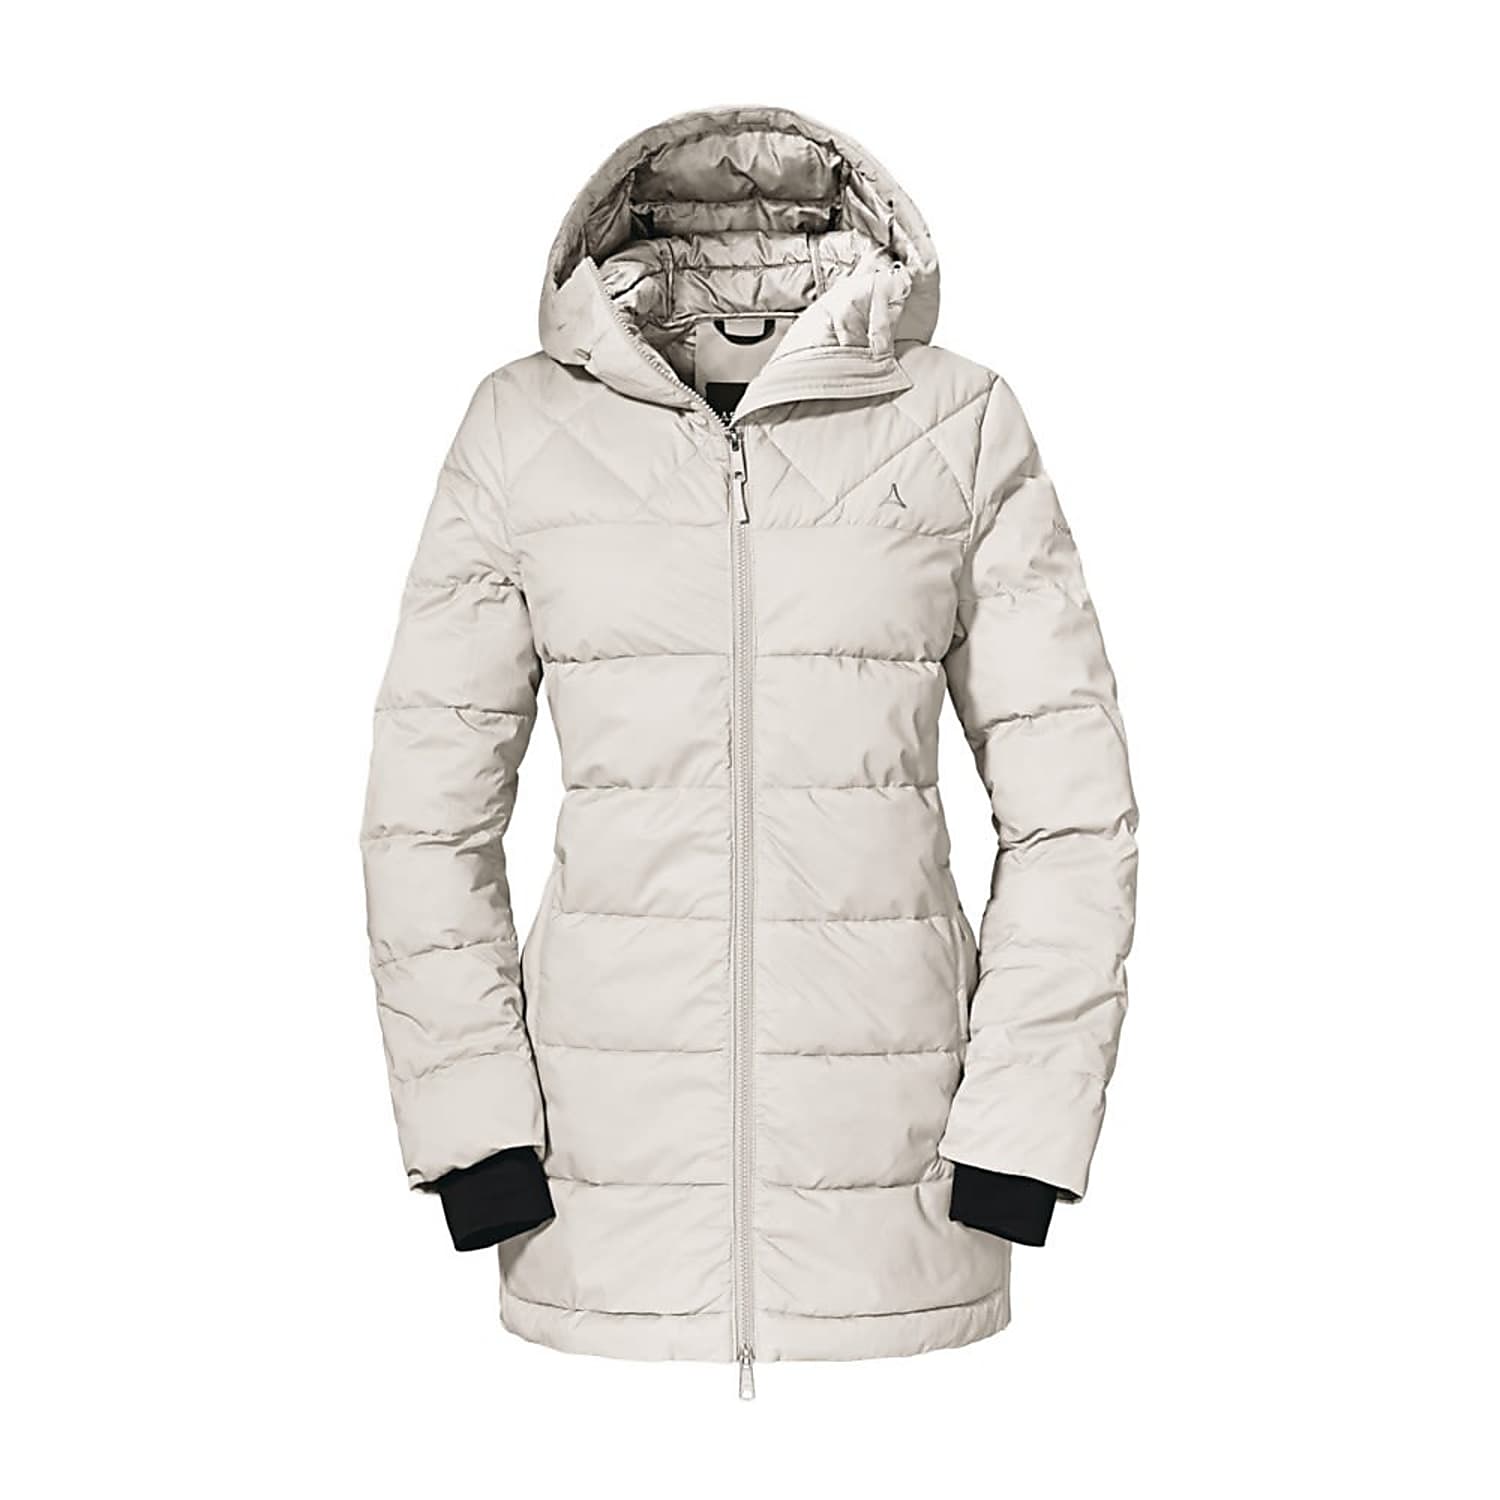 Schoeffel W shipping BOSTON, - and PARKA Fast White INSULATED cheap Whisper